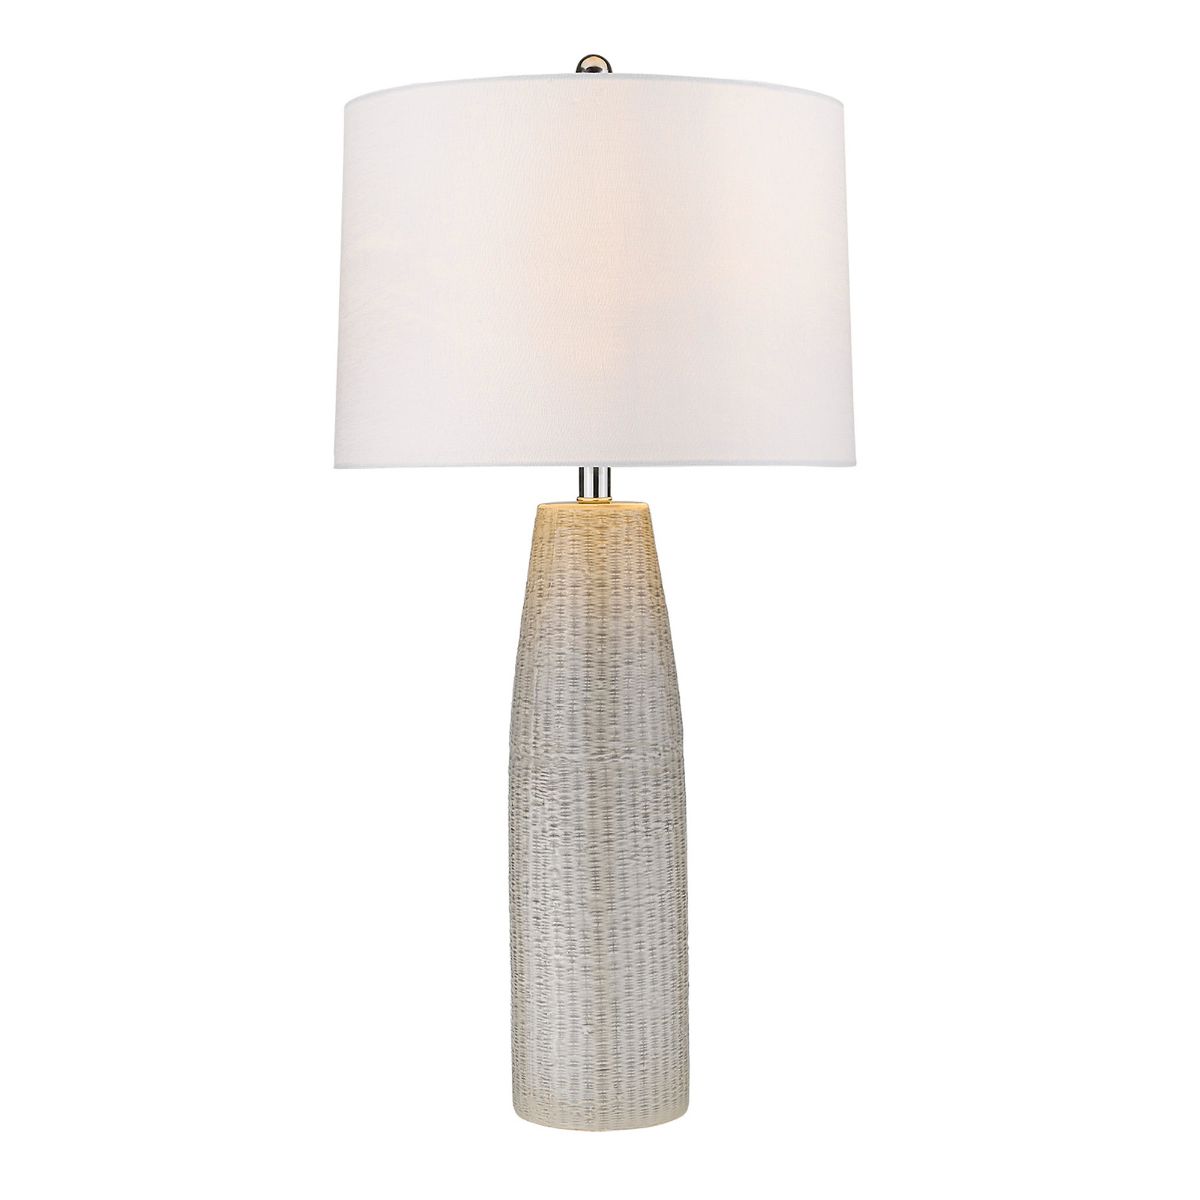 Trend Home 1 Light 33 inches Table Lamp Ceramic Body and Polished Nickel Accents